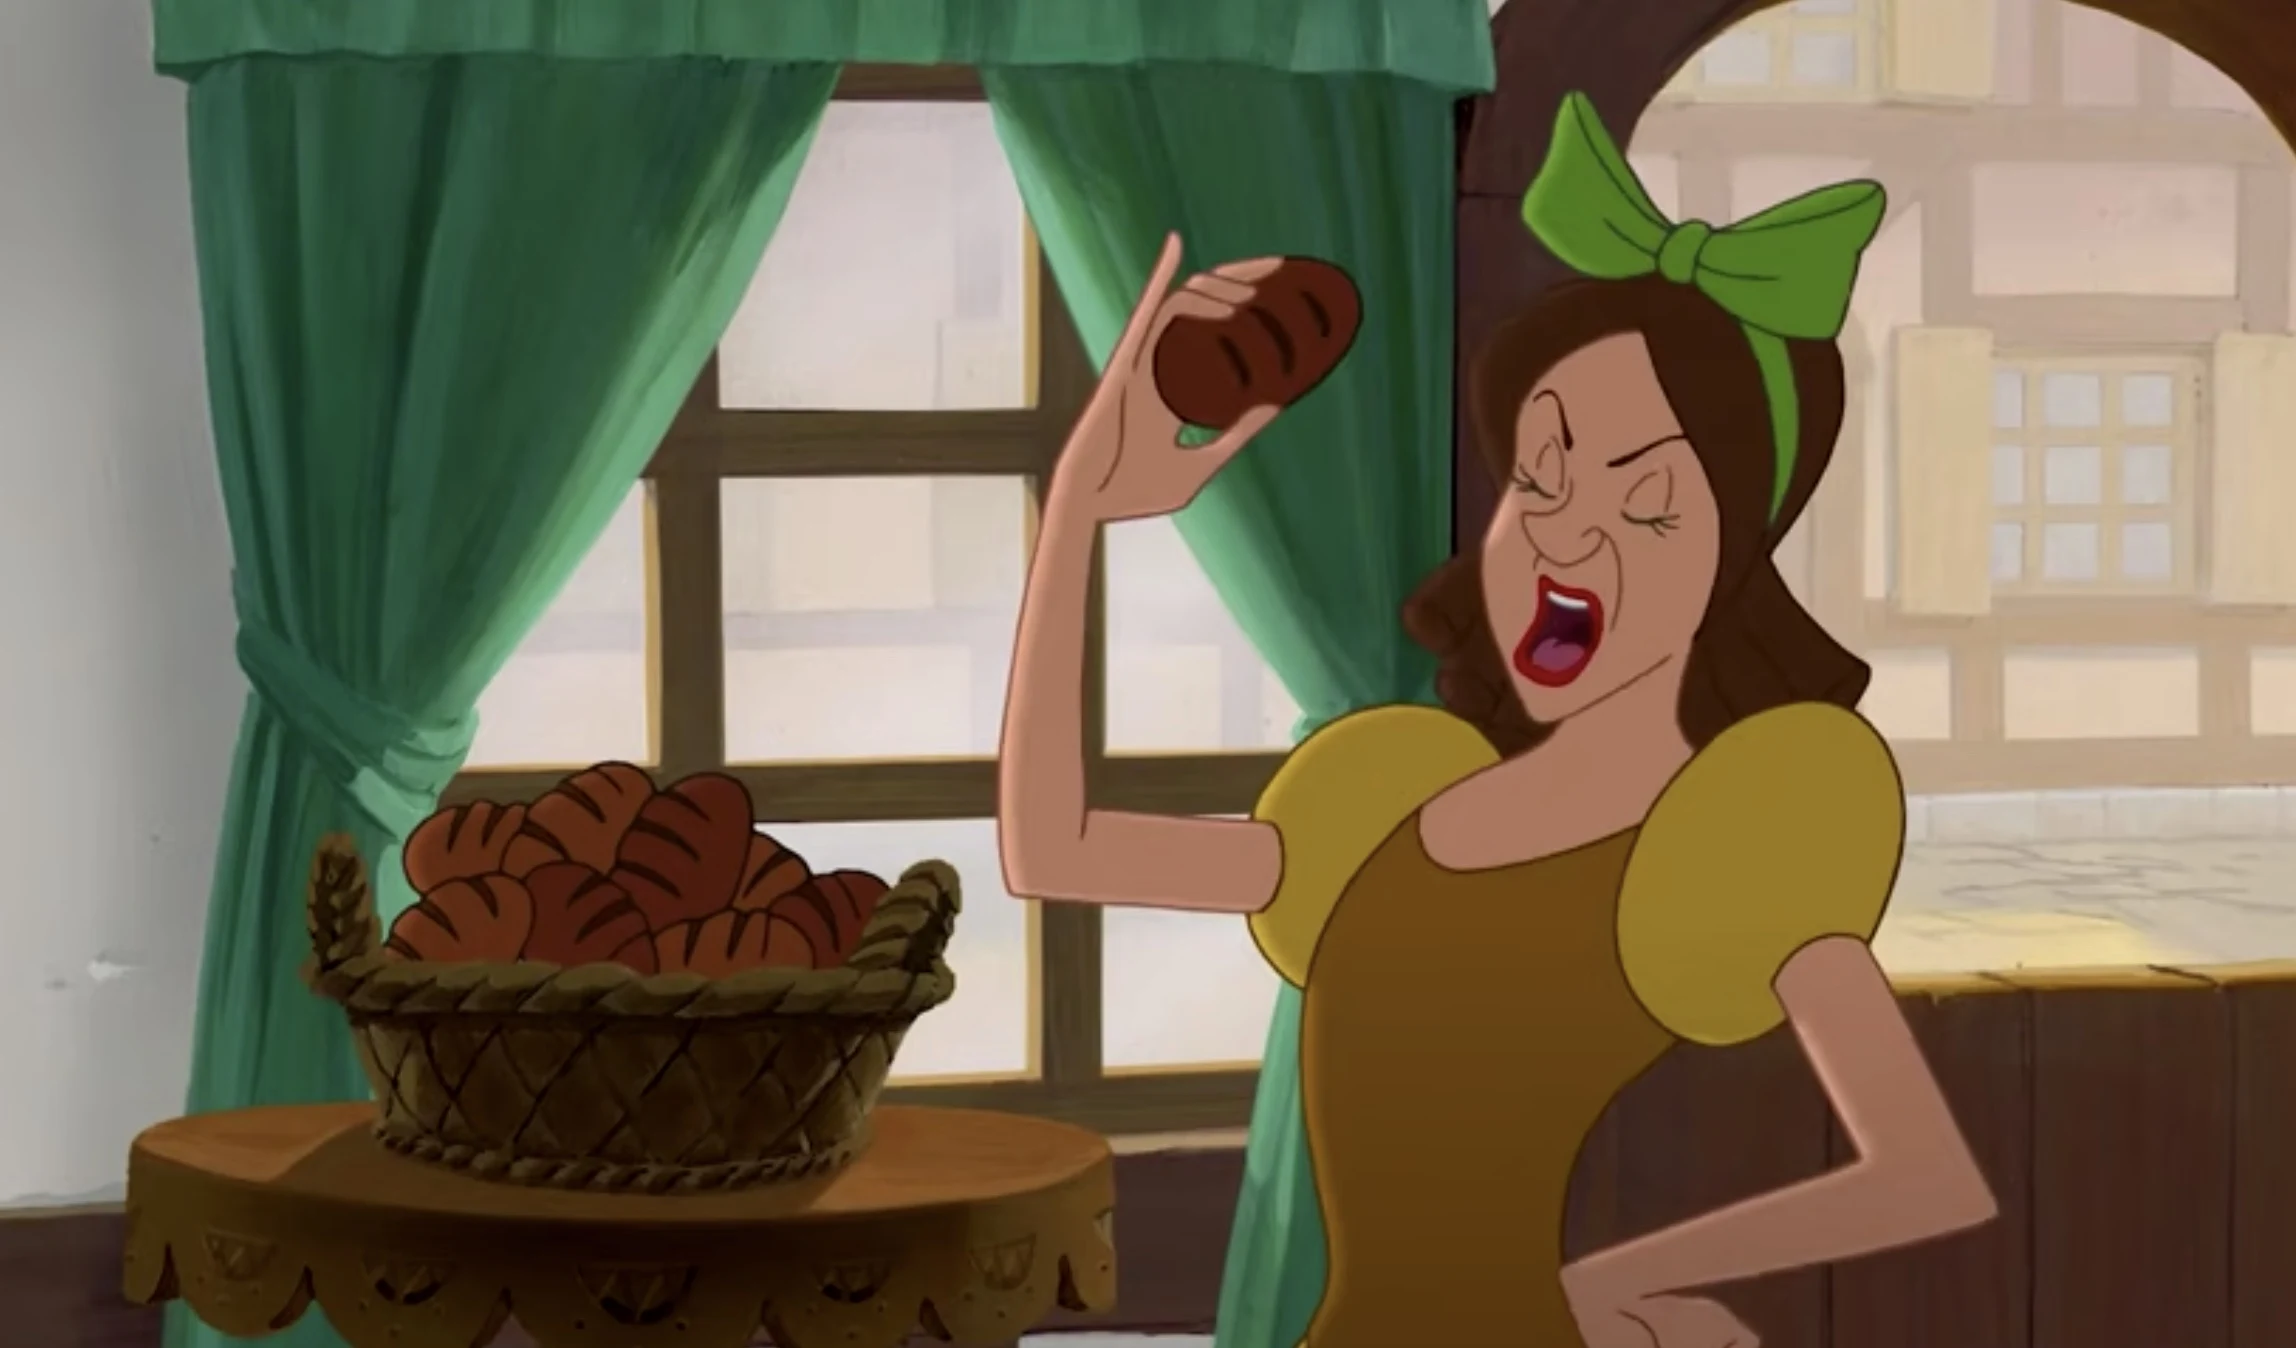 Drizella holding a freshly baked roll